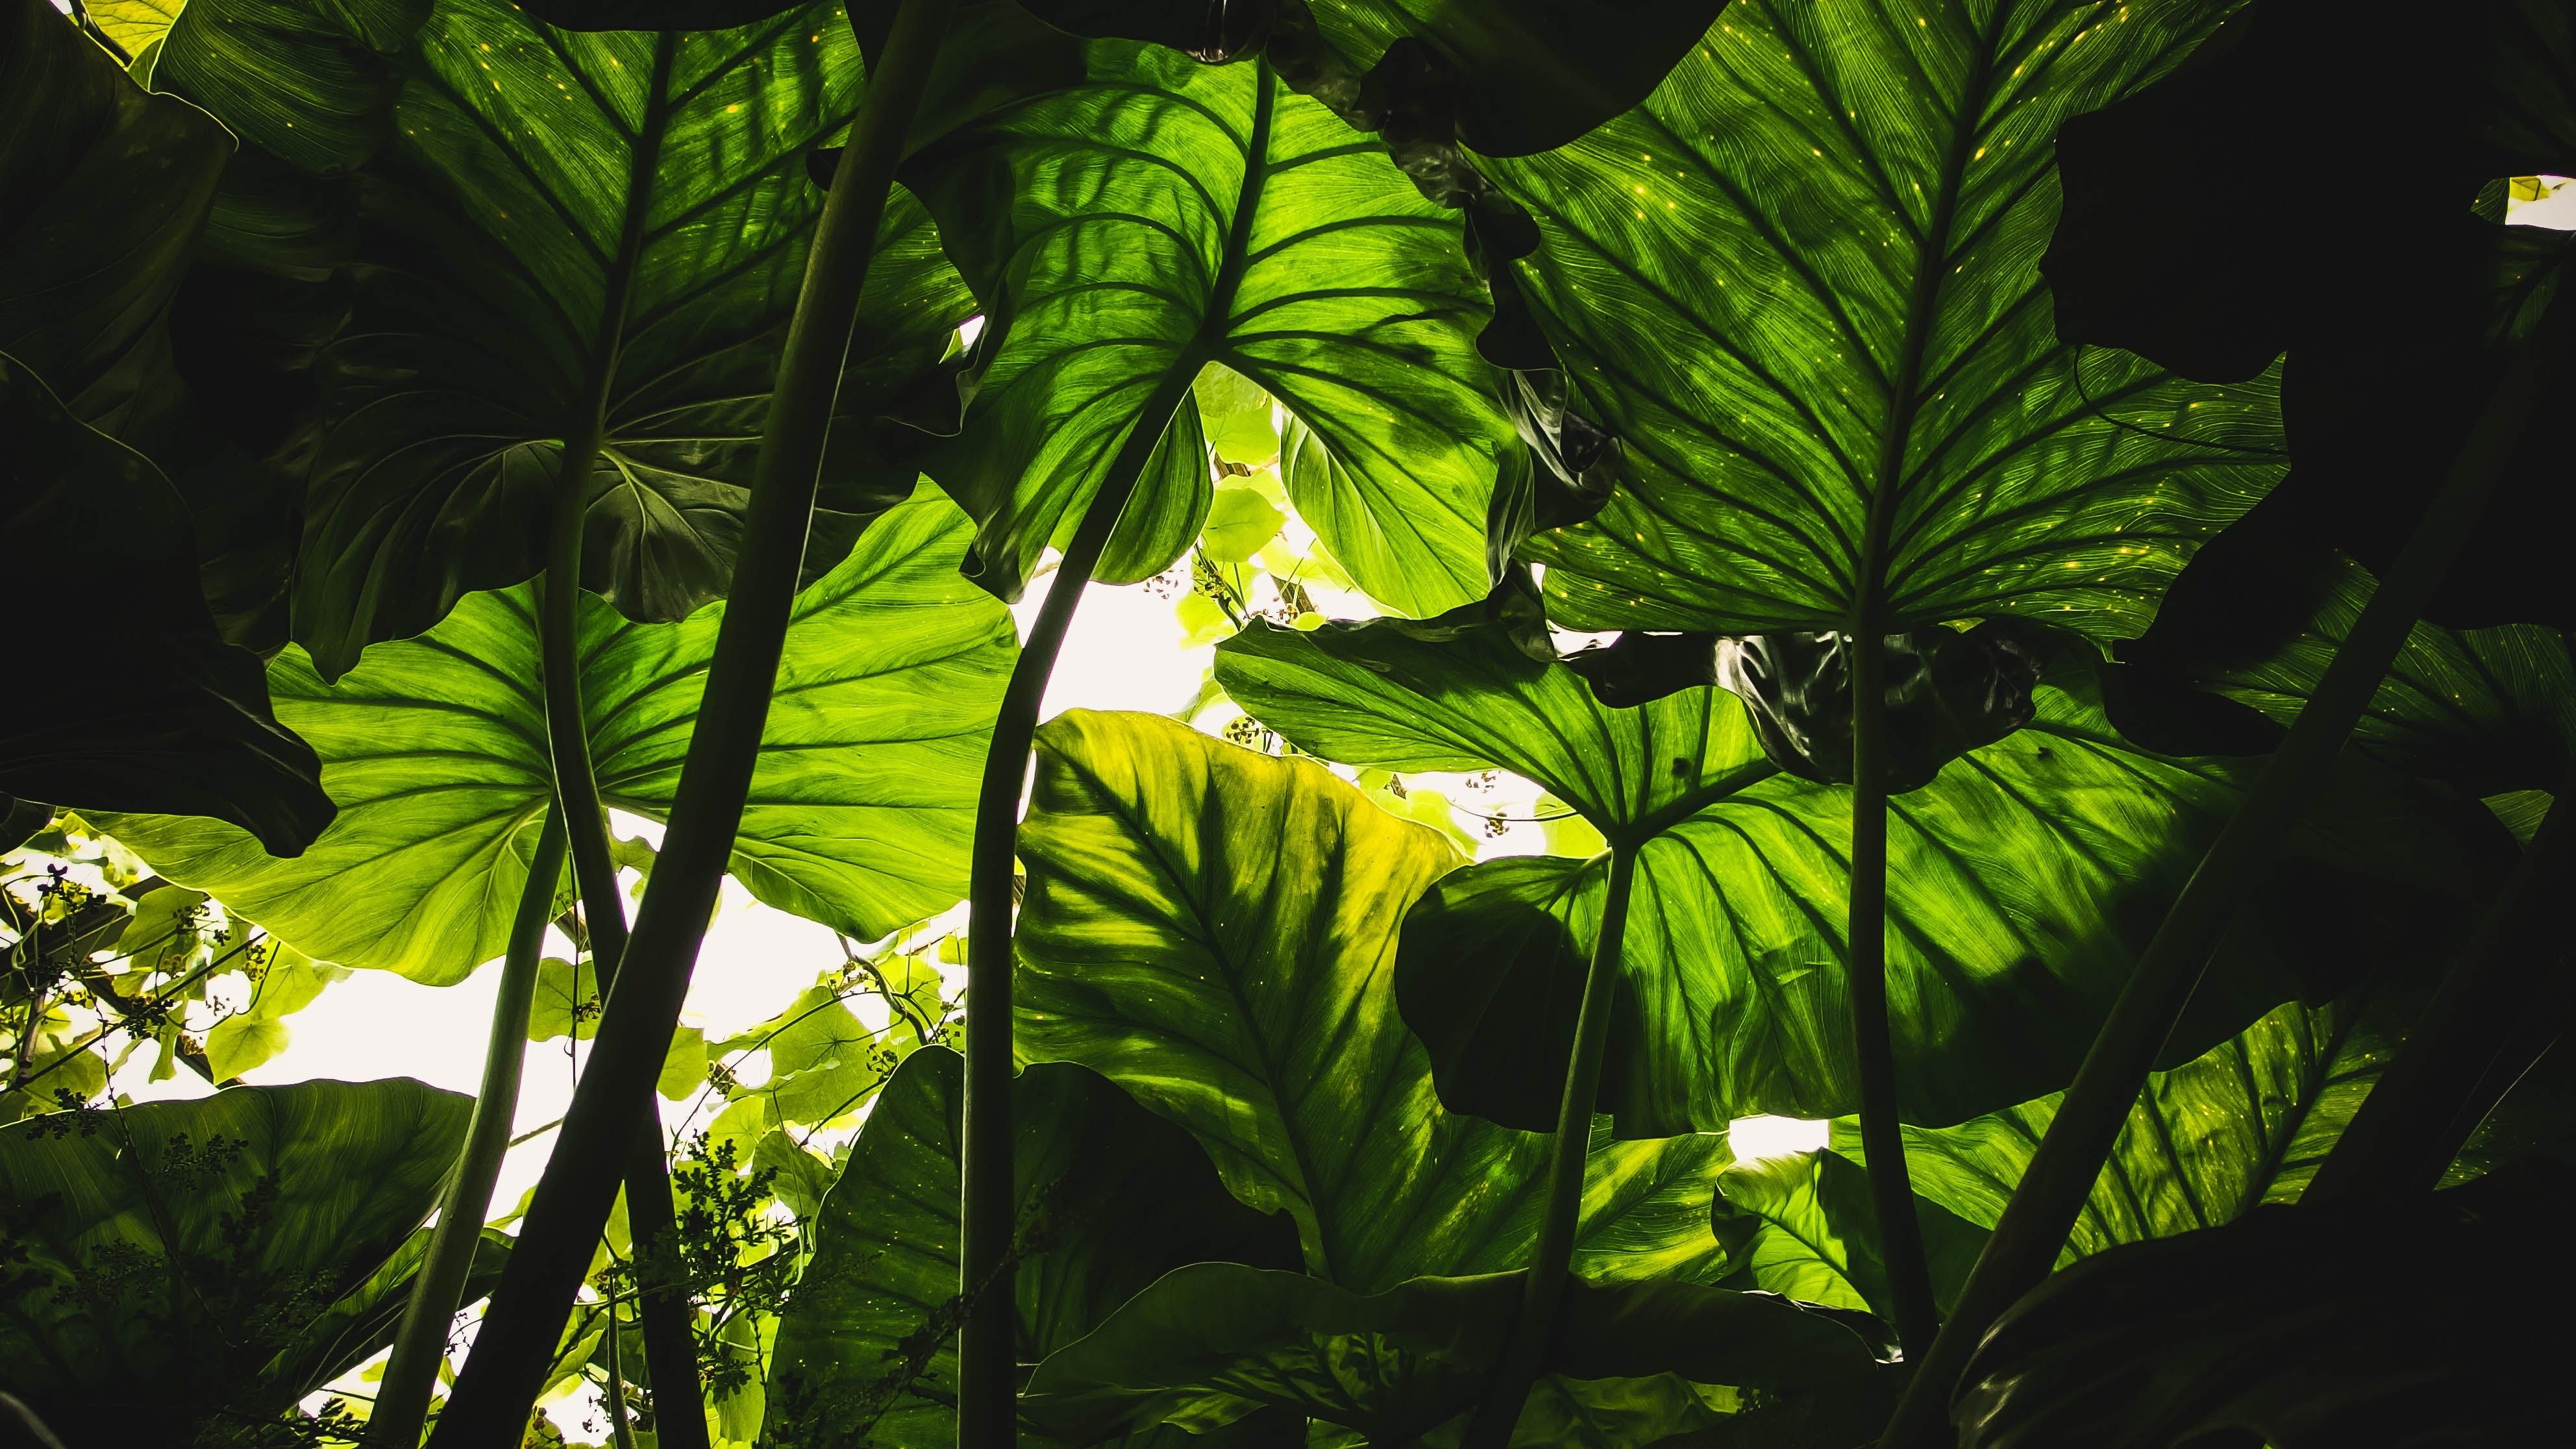 A hero image depicting a cluster of leaves from Pexels